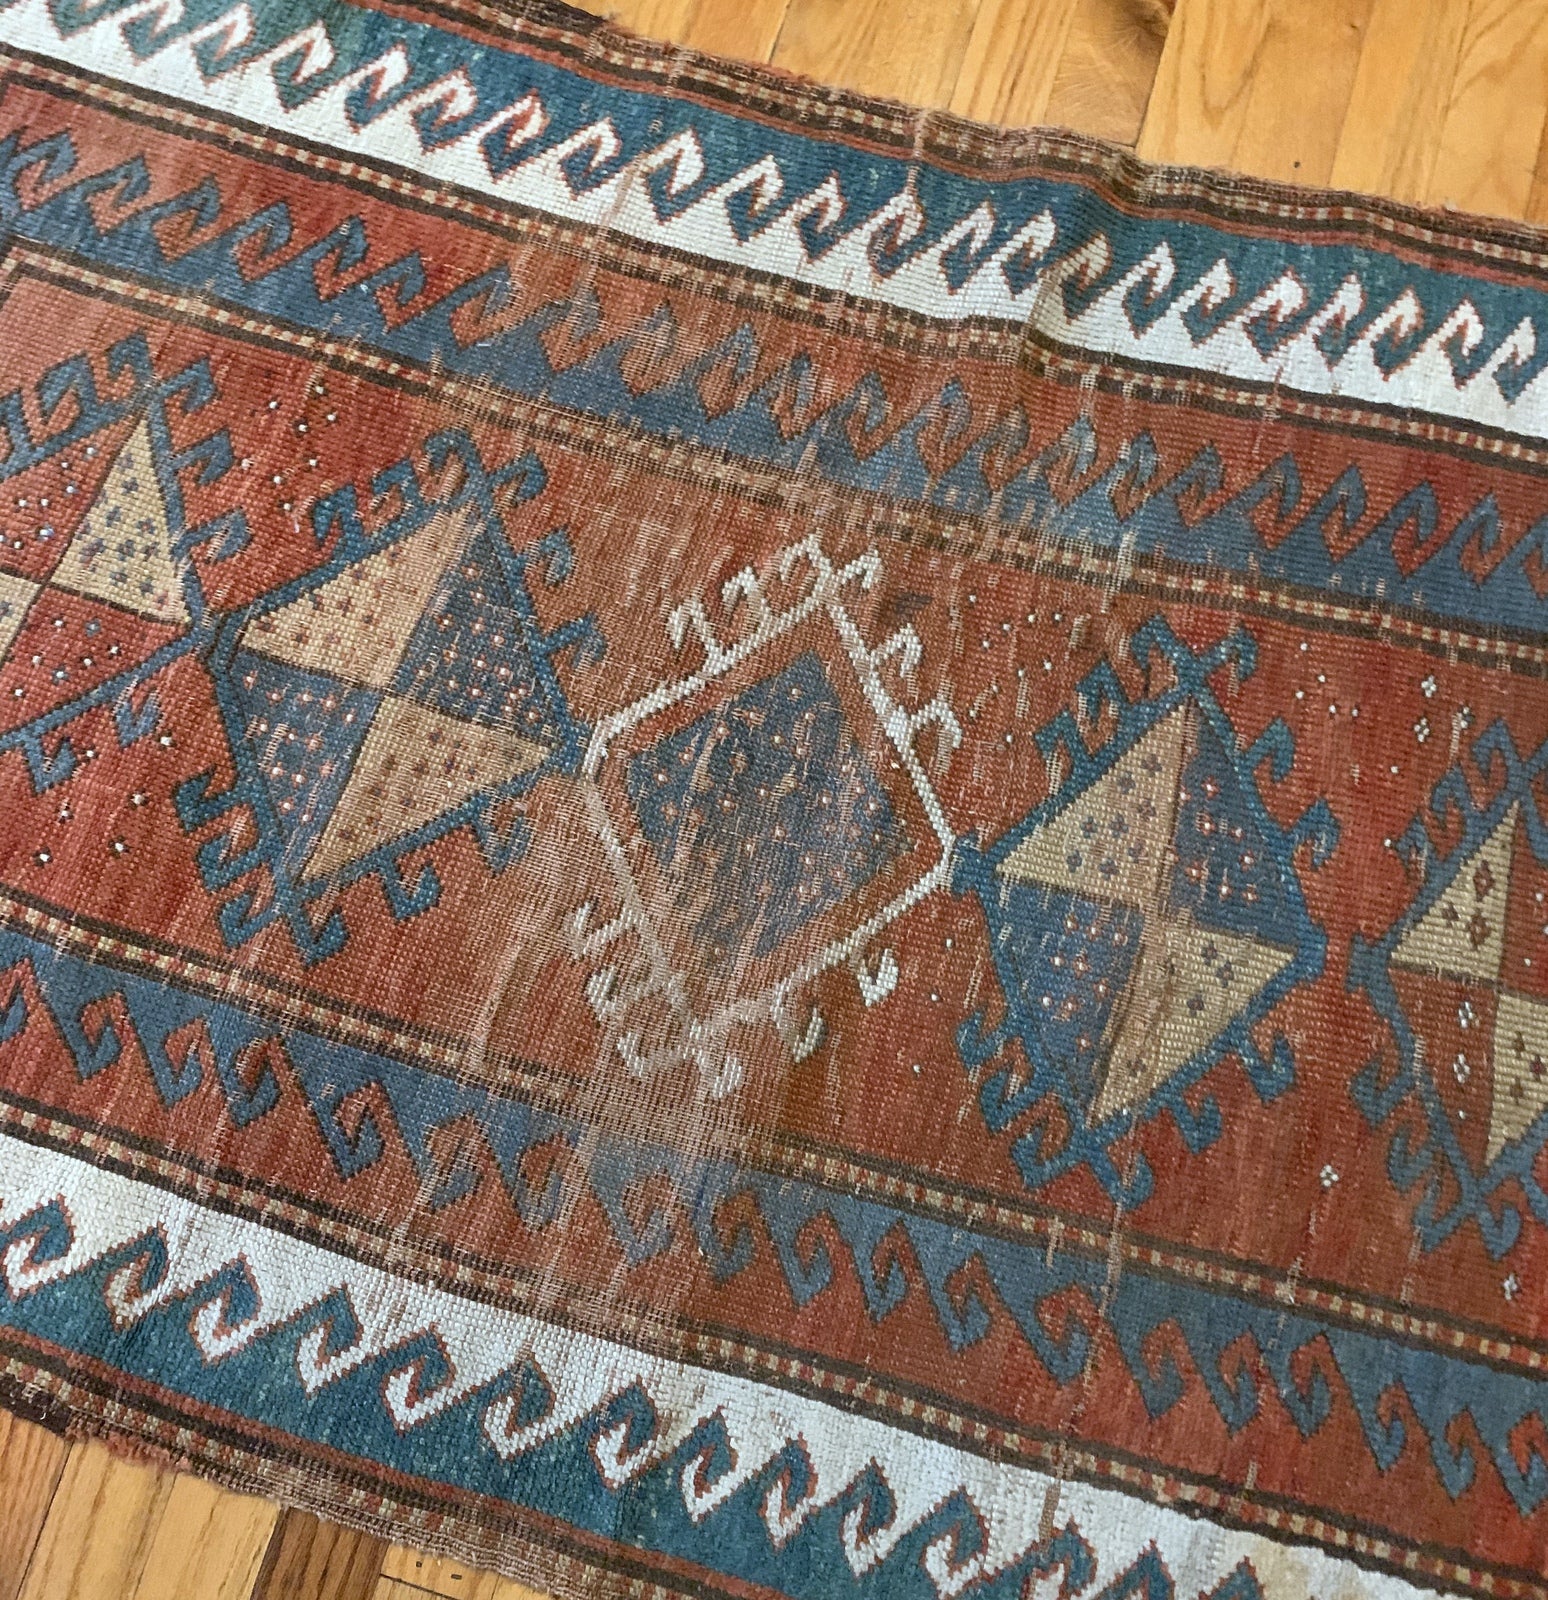 Handmade antique collectible Caucasian Kazak rug in natural dyes. The rug is from the end of 19th century in original condition, it has some age wear